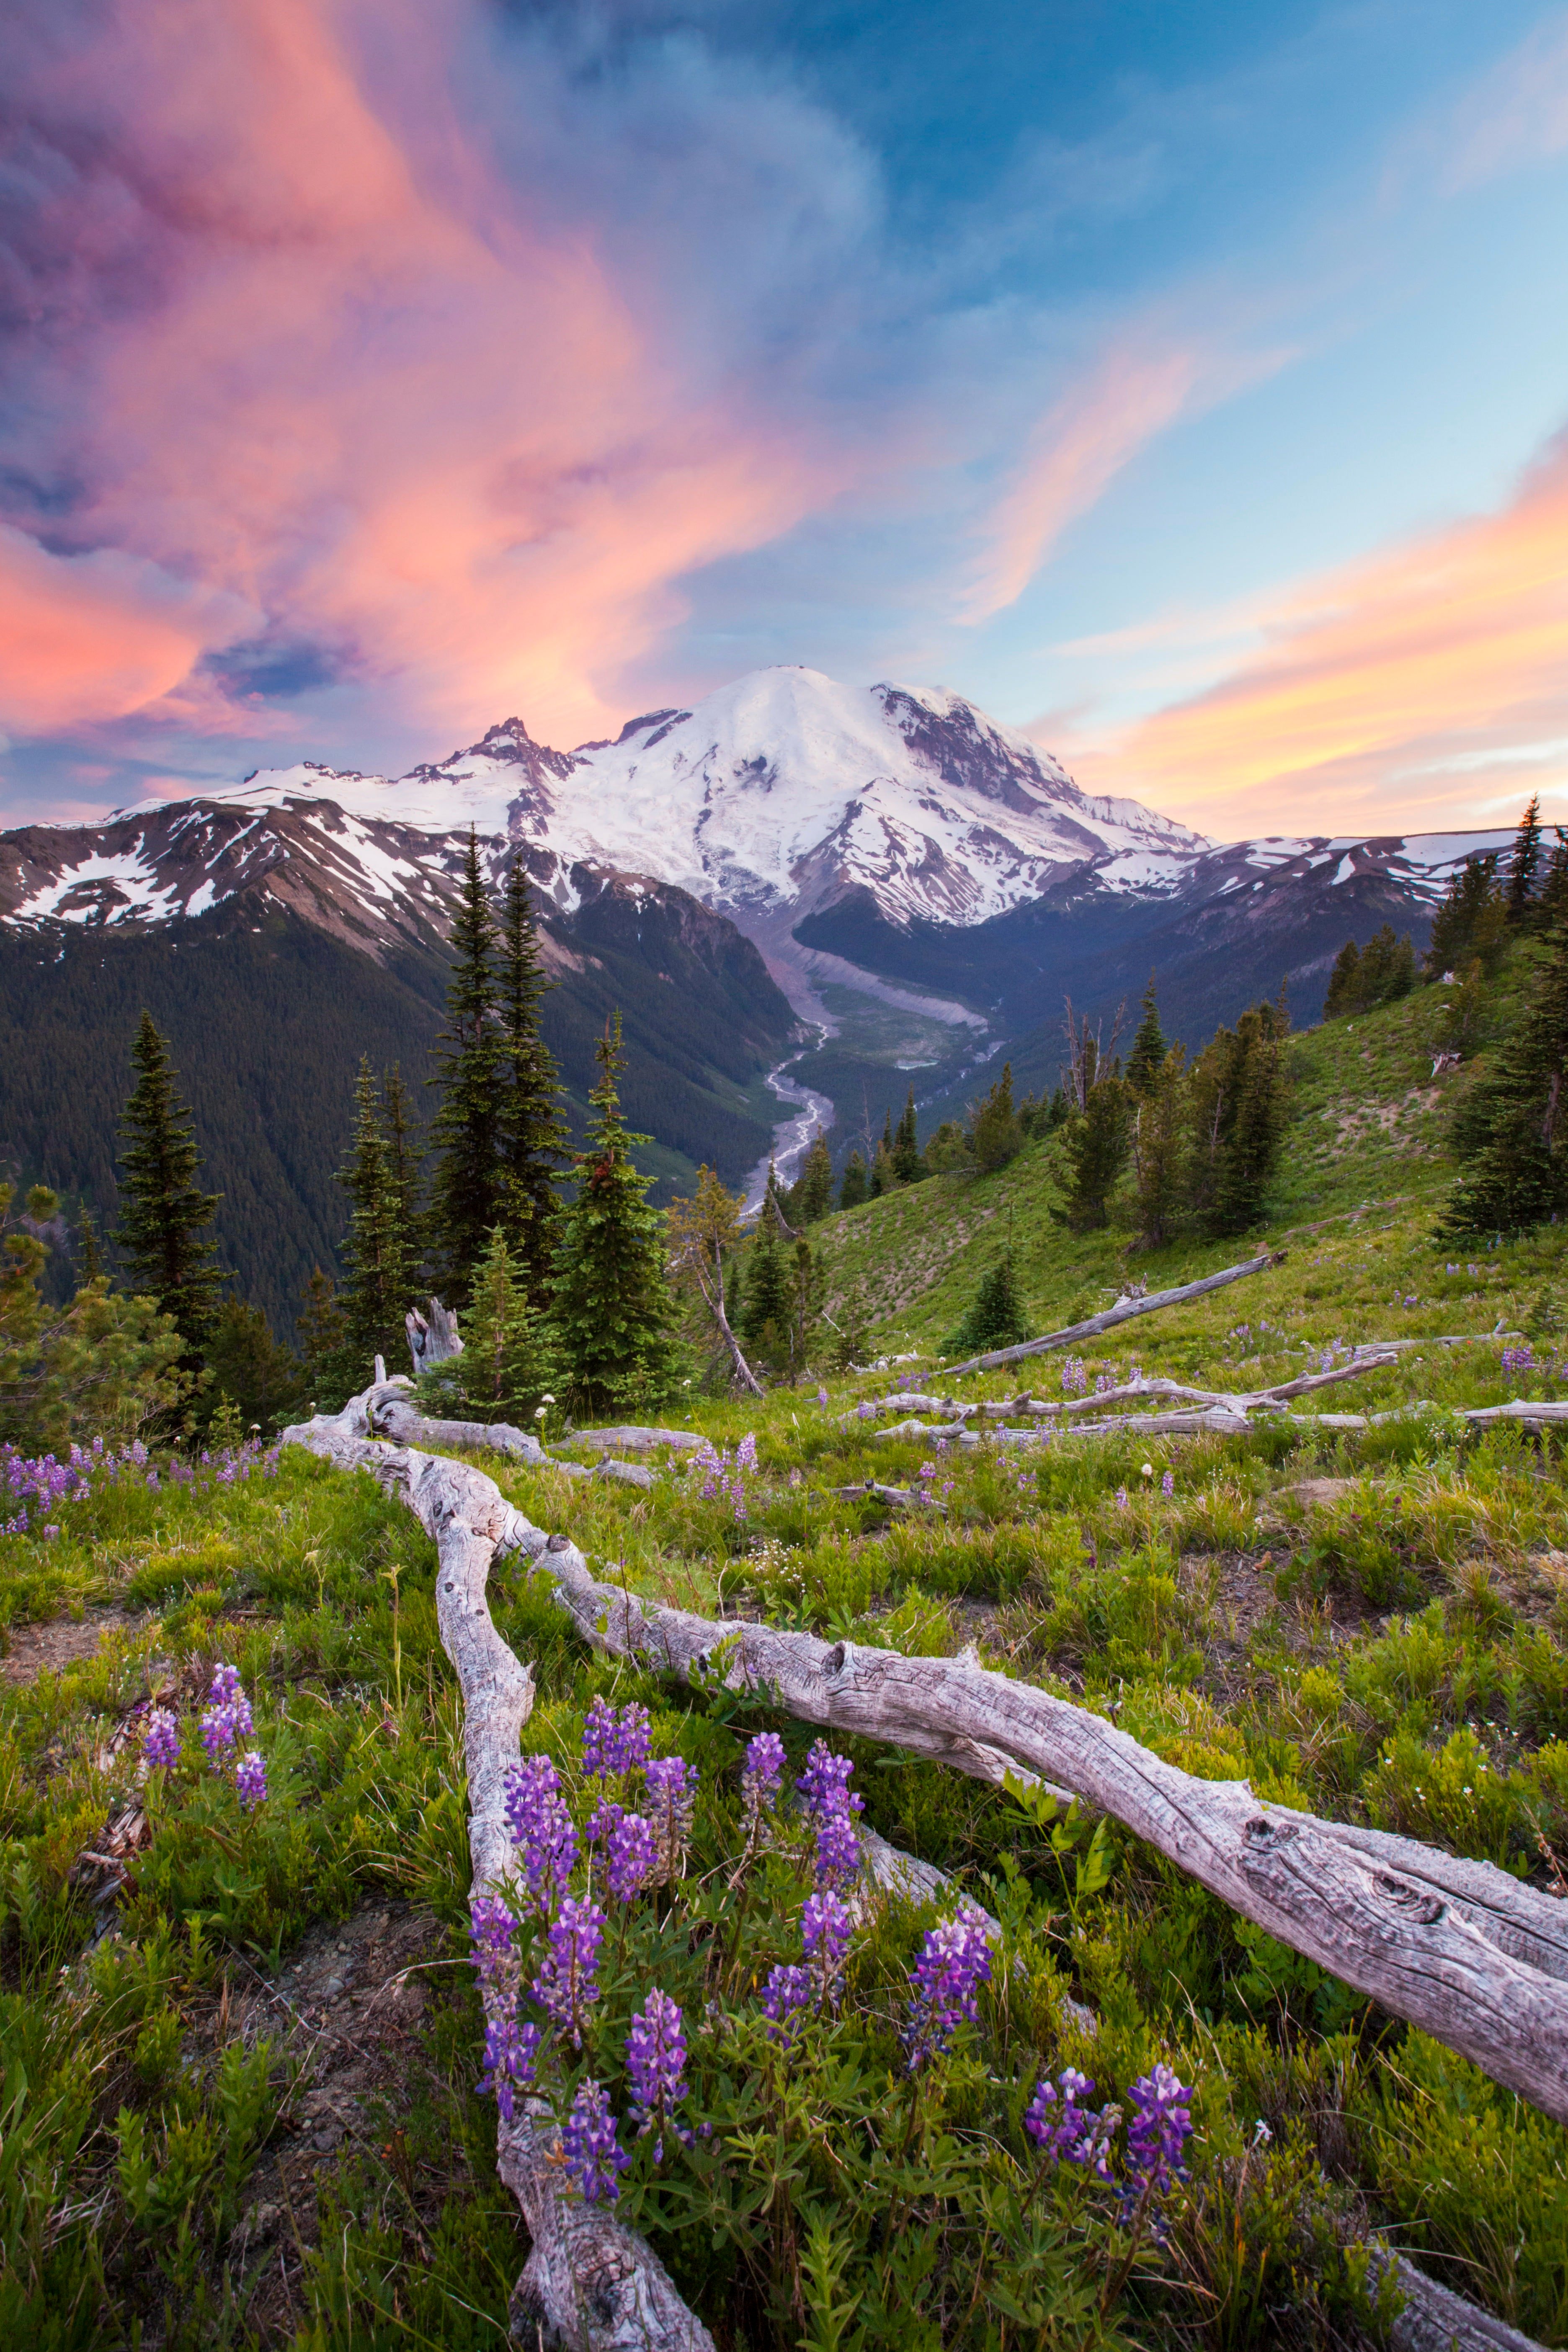 The national parks to see wildflowers in the US